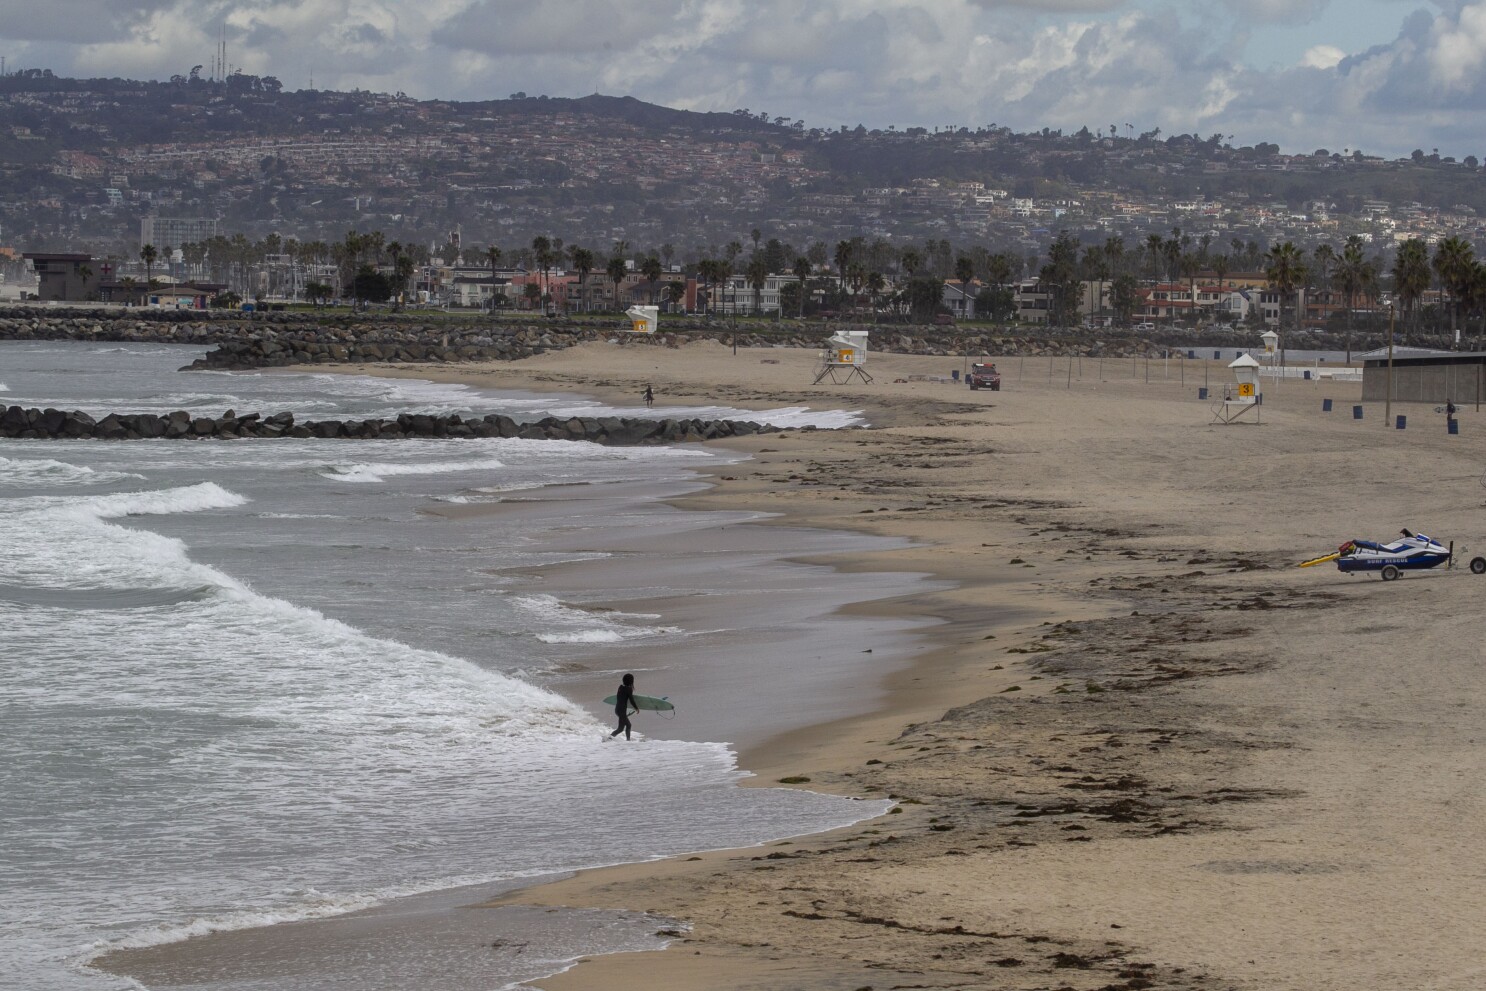 Column Surfers Are Anything But Up With Most San Diego Beaches Closed The San Diego Union Tribune